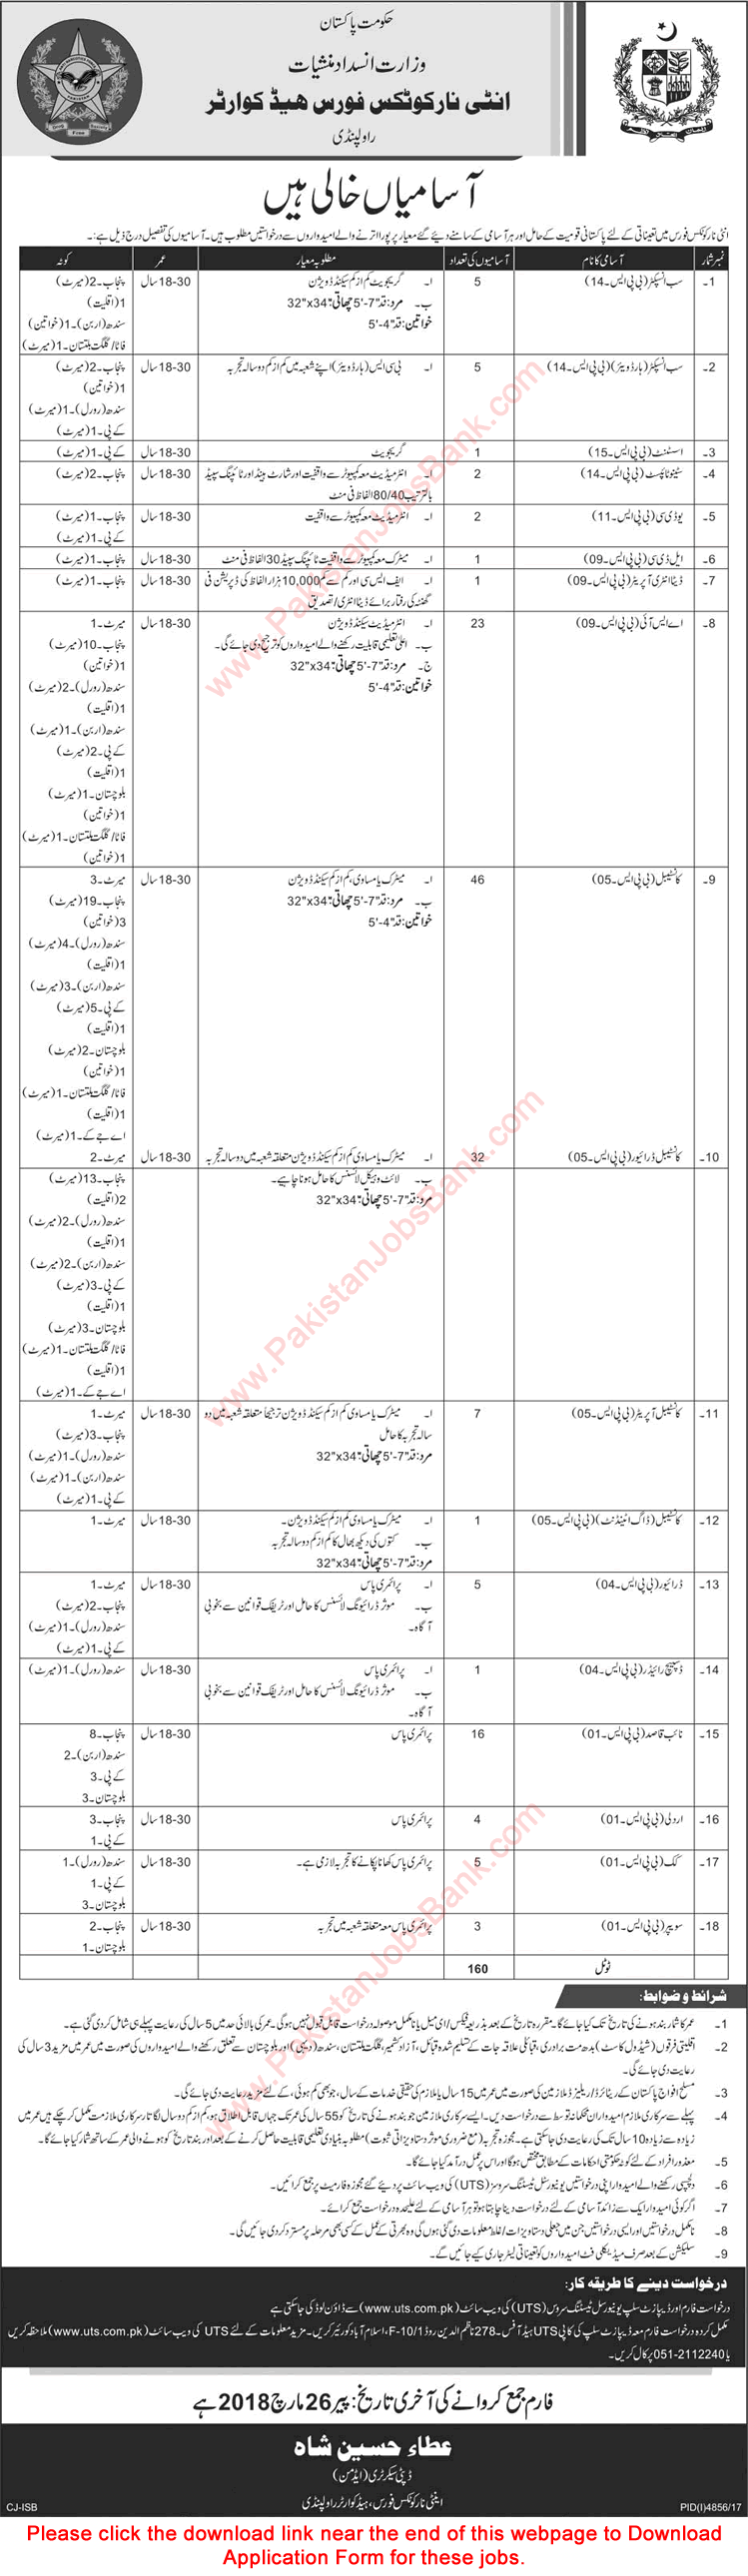 Anti Narcotics Force Jobs 2018 March UTS Application Form ASI, Constables, Drivers & Others ANF Latest